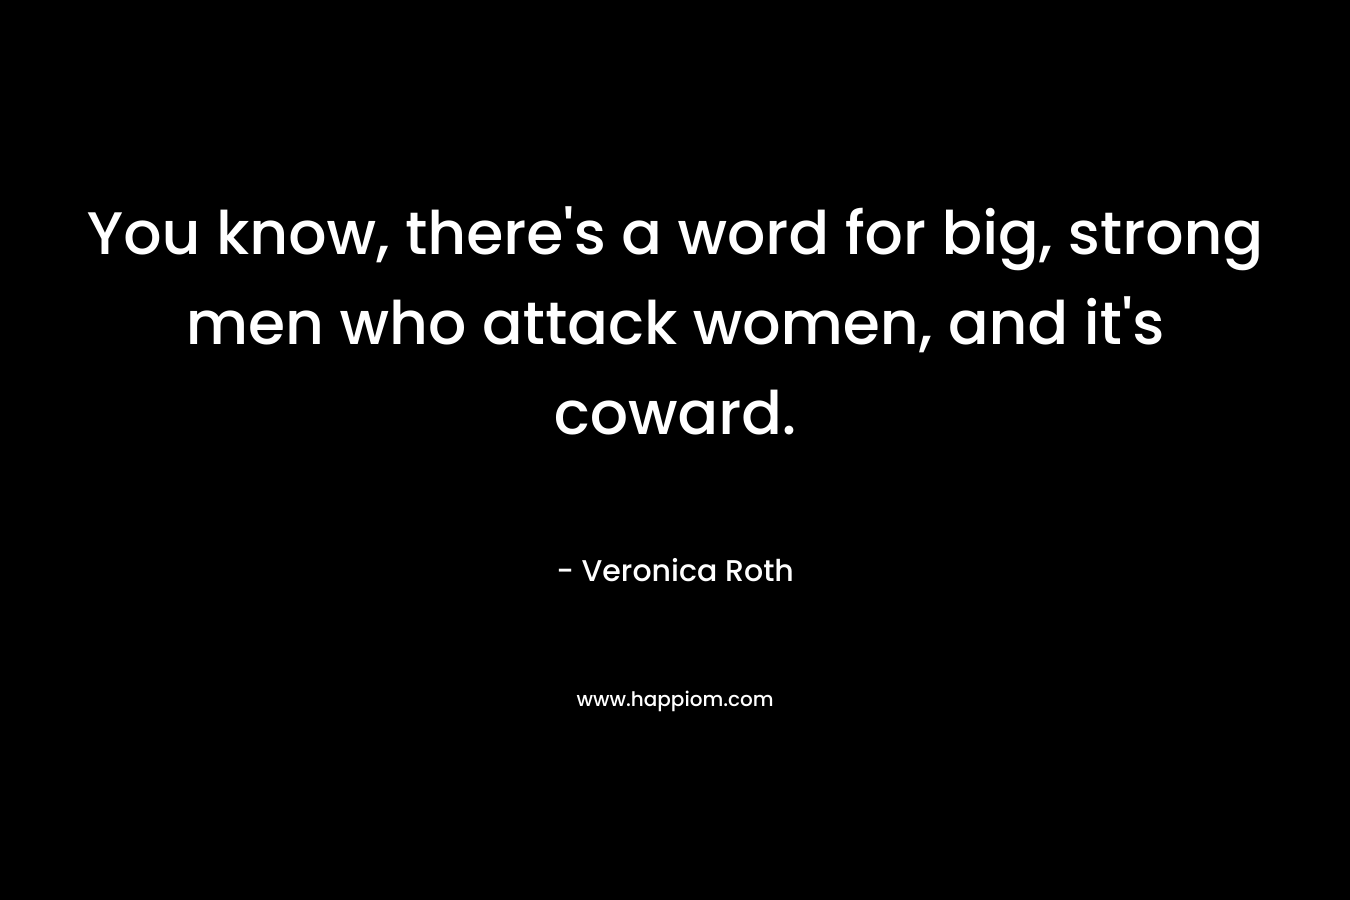 You know, there's a word for big, strong men who attack women, and it's coward.